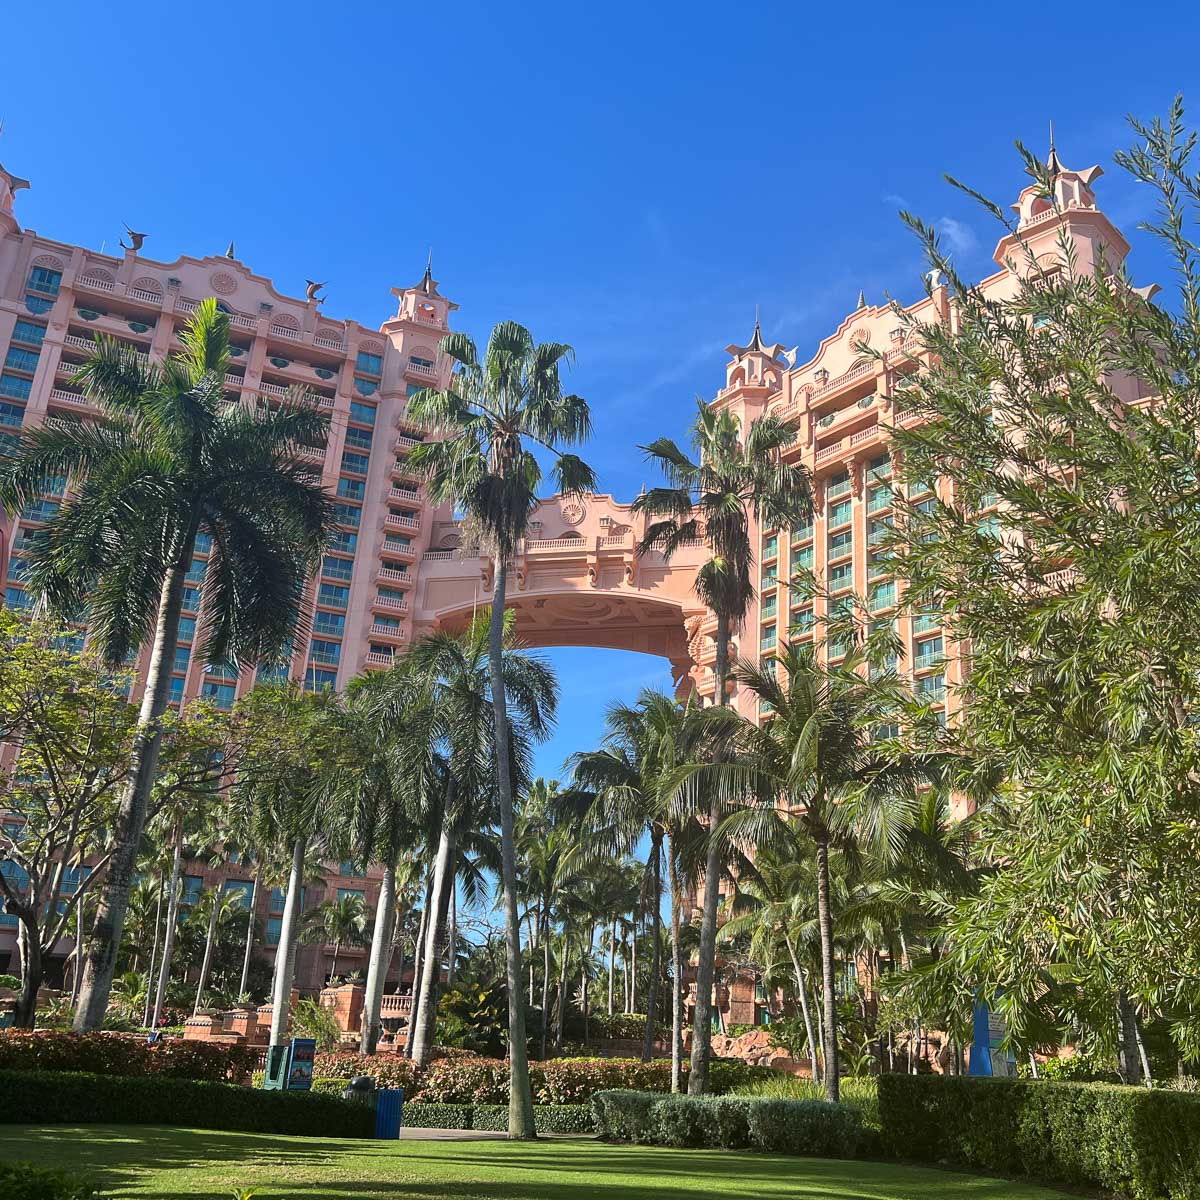 ULTIMATE Atlantis Bahamas Review the good and the bad!